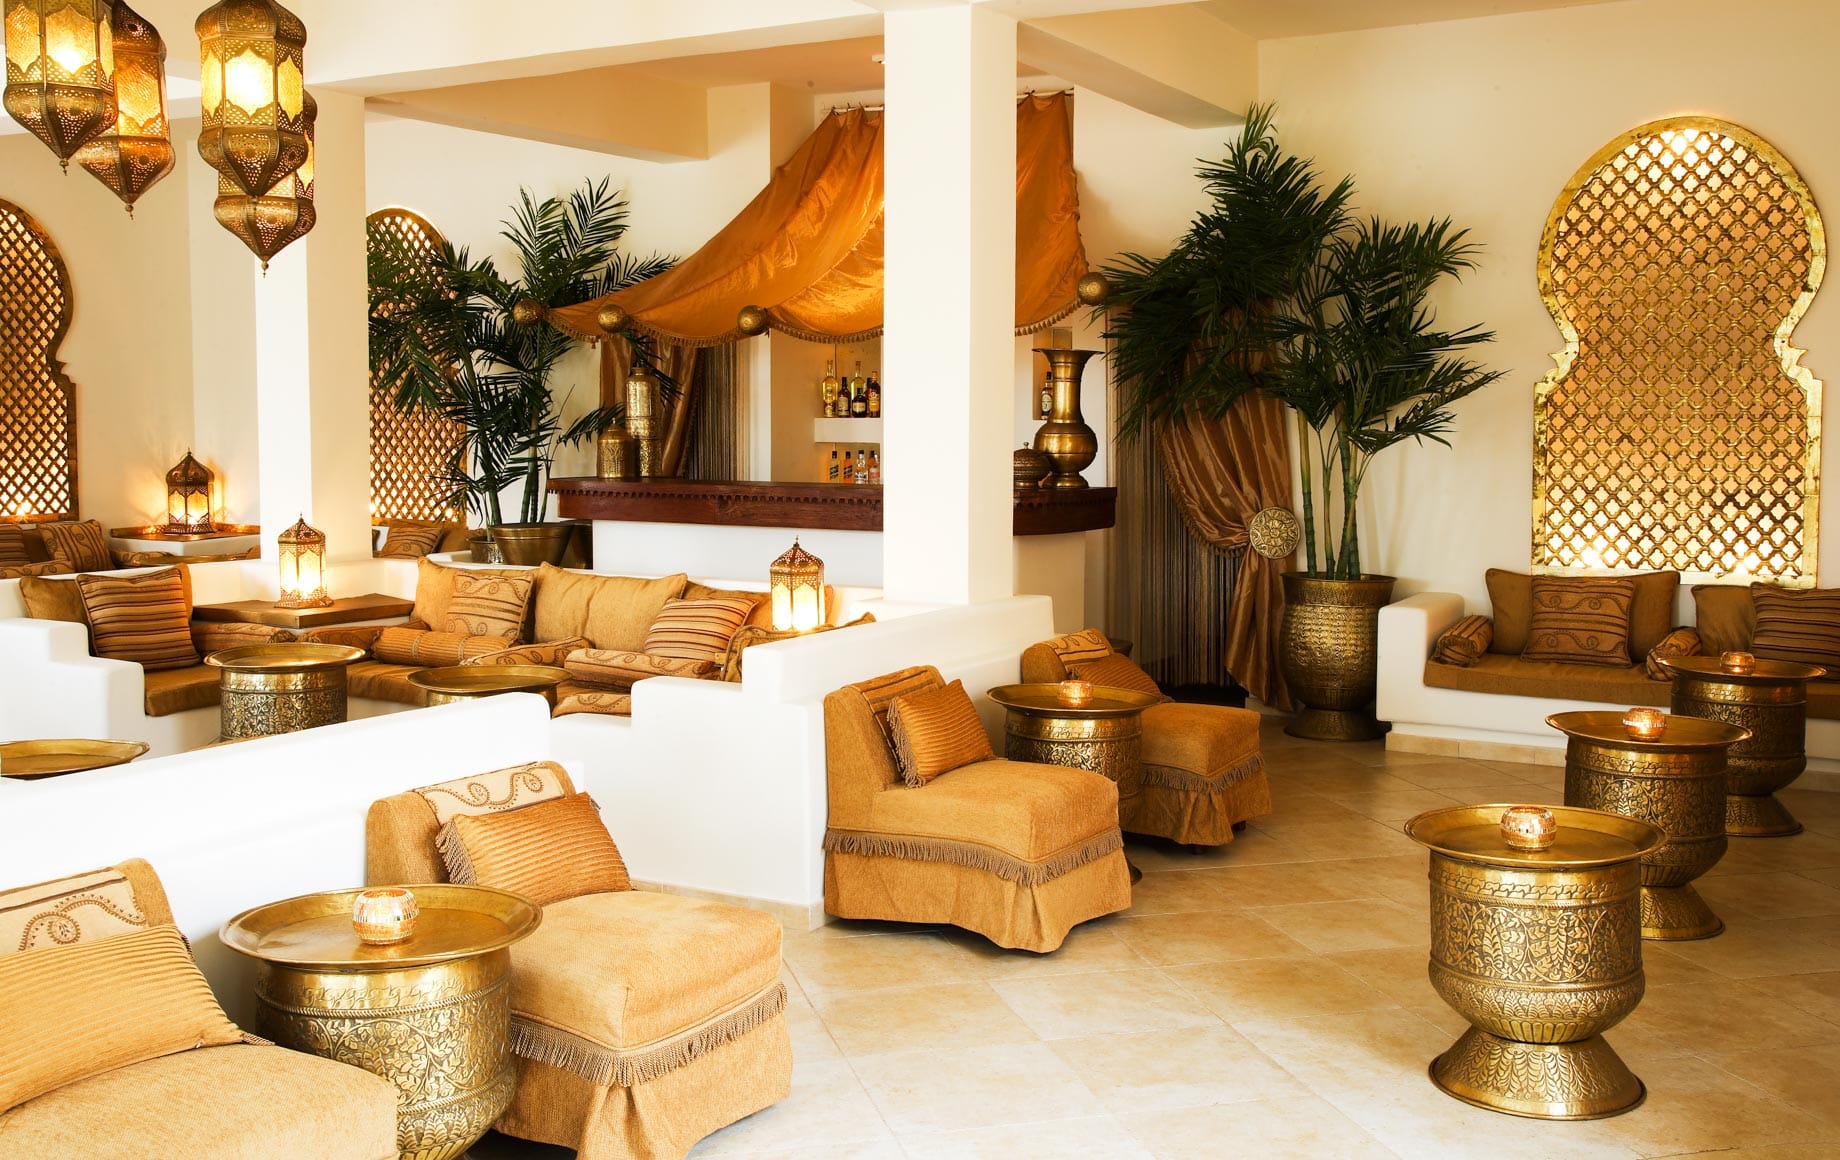 The interior of the Baraza Resort and Spa